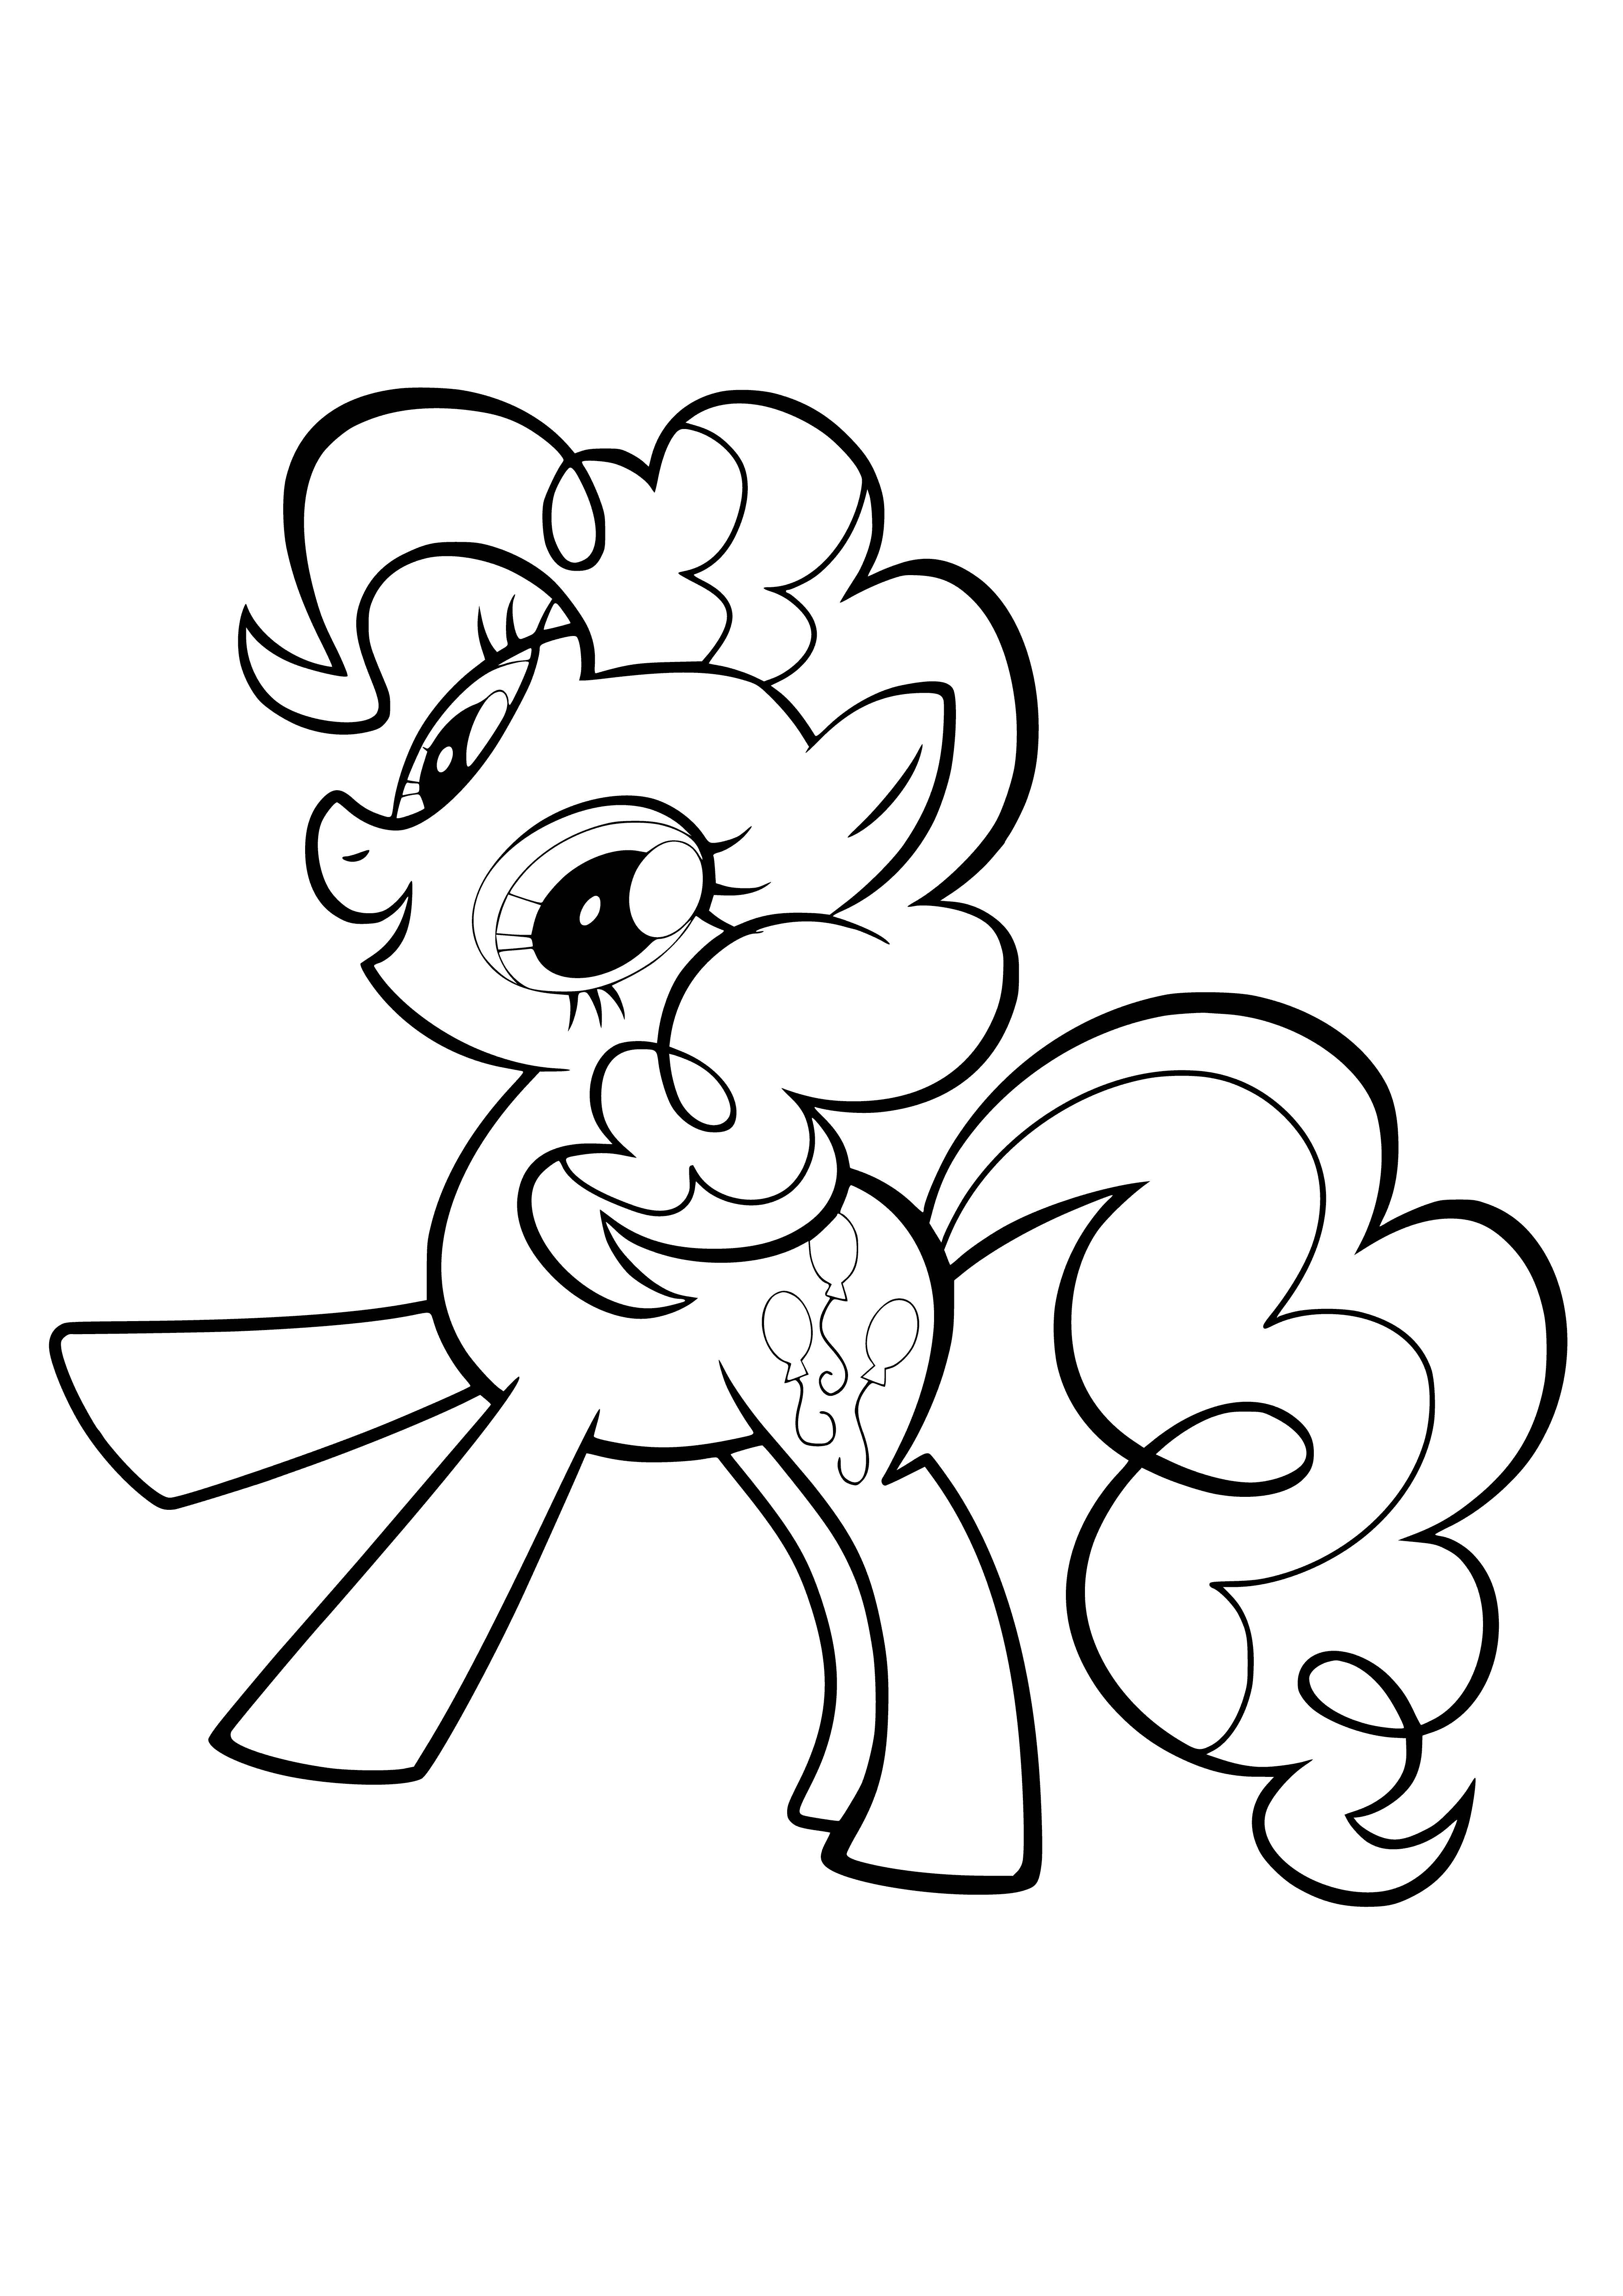 coloring page: Cheerful Pinkie Pie loves to party and bake delicious treats to make others smile. #MyLittlePony